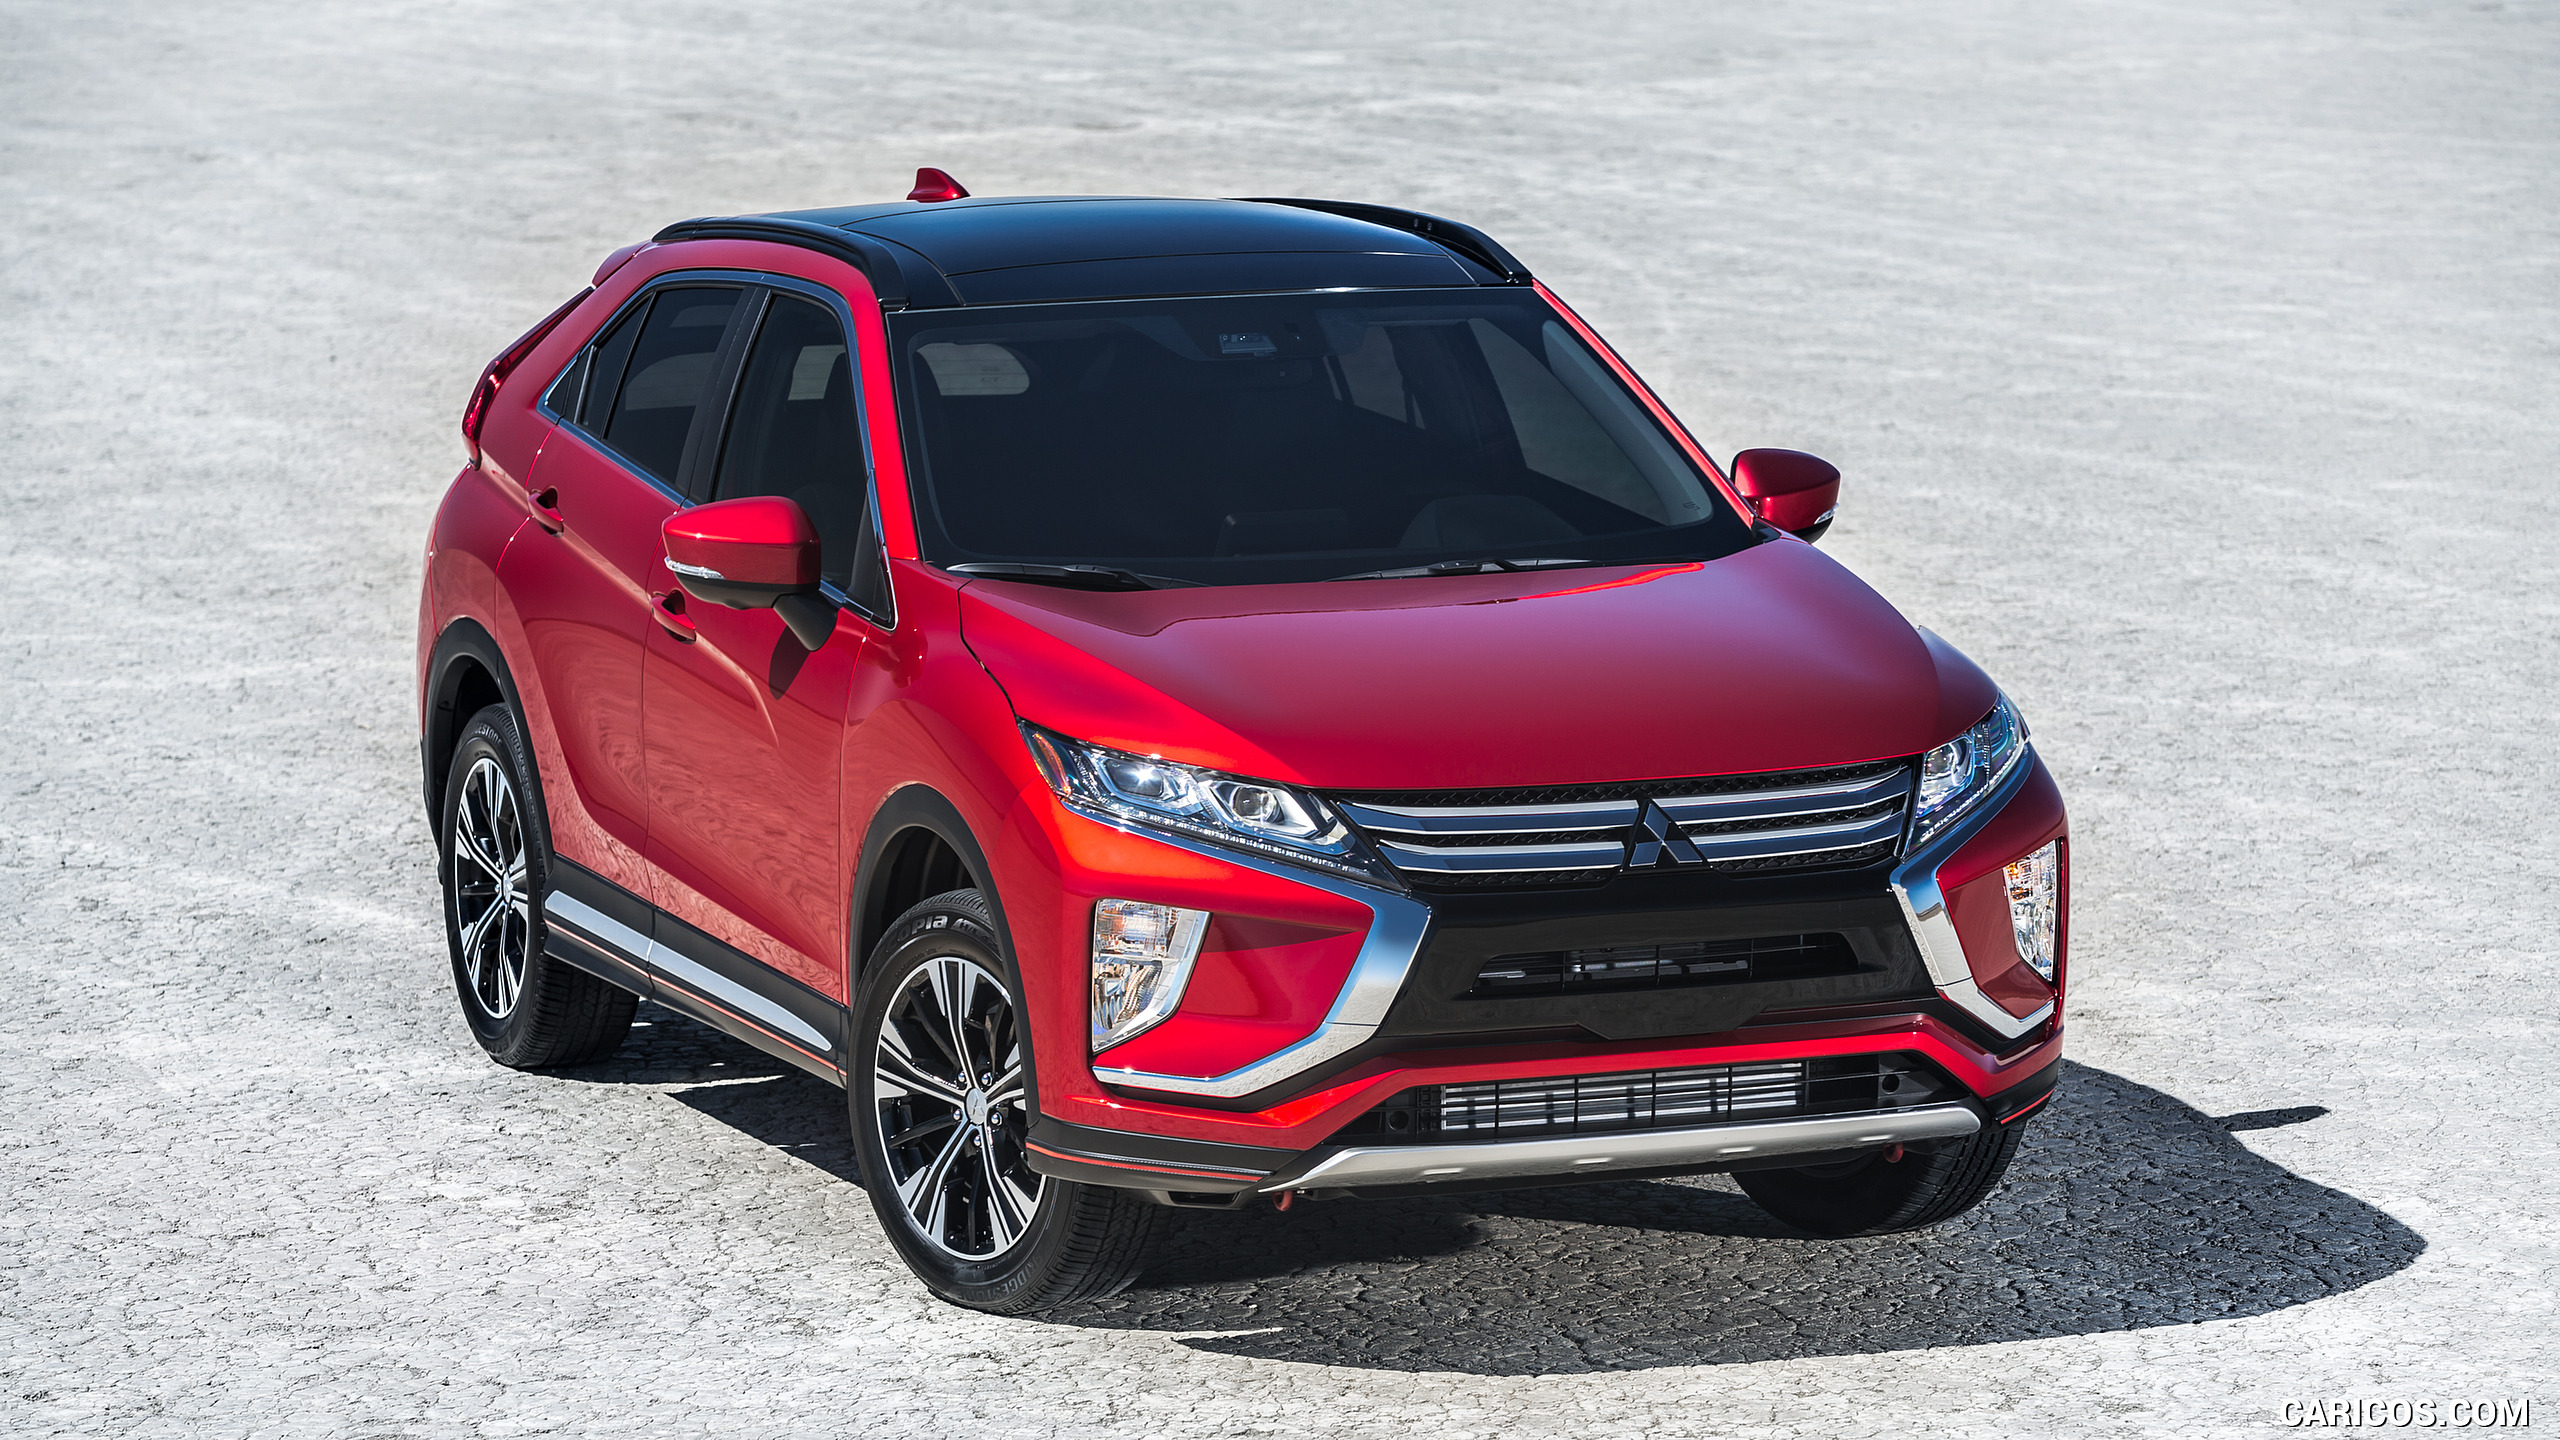 2018 Mitsubishi Eclipse Cross - Front, #47 of 173